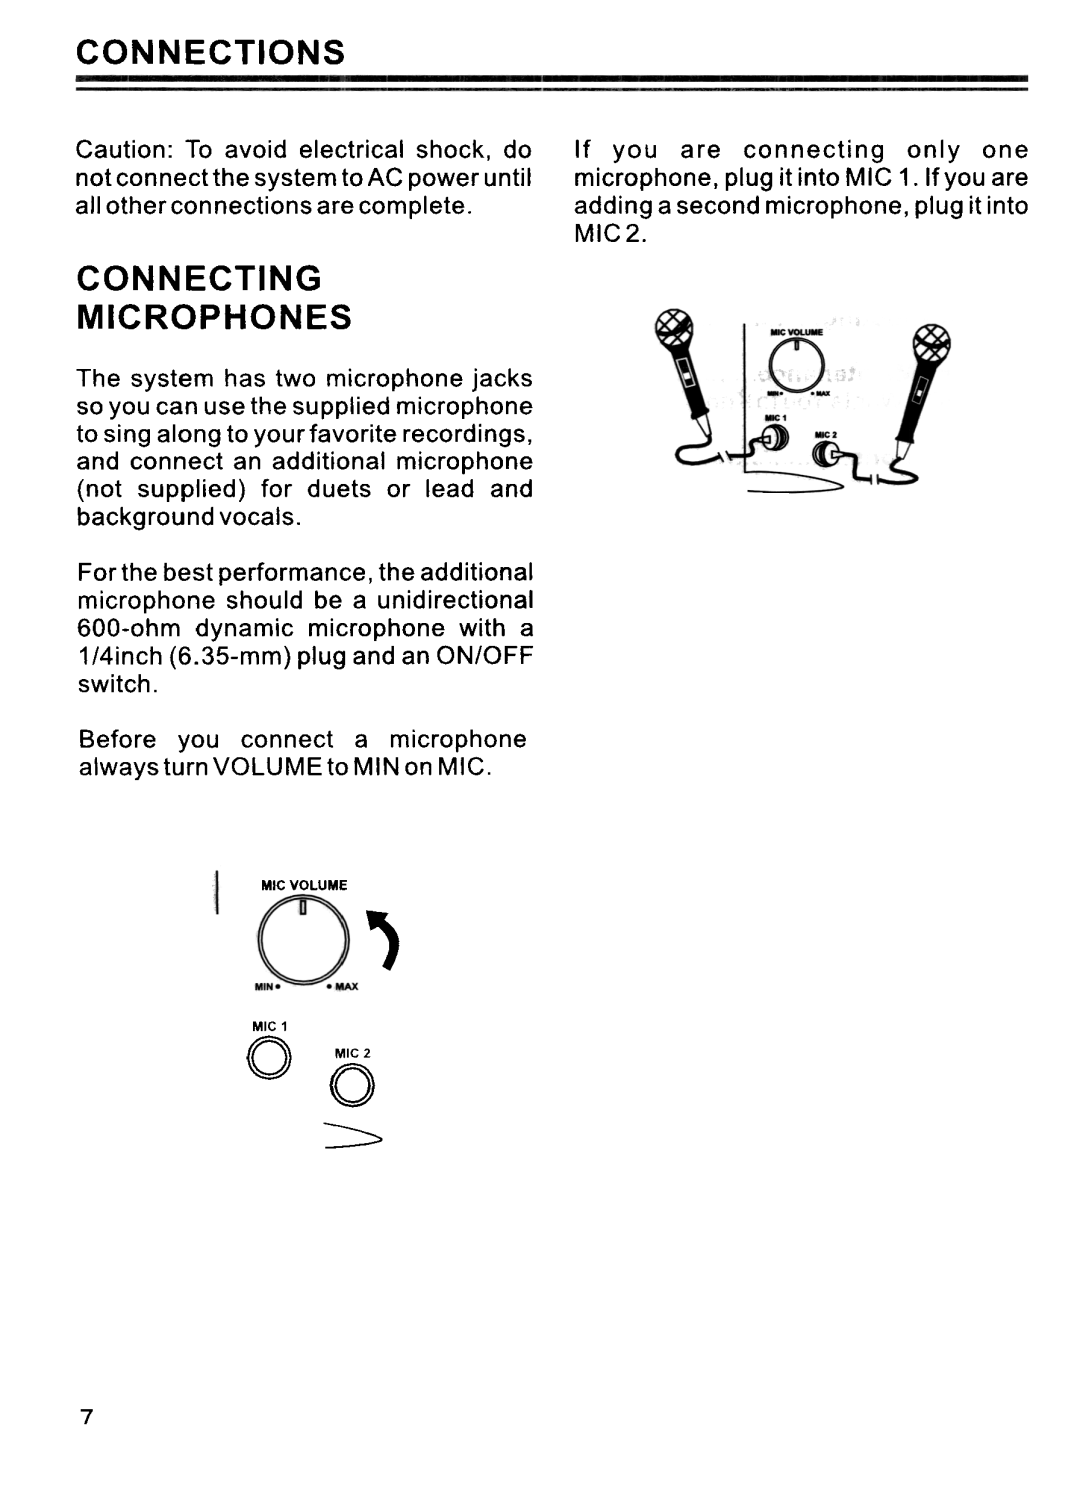 Memorex MKS 3001 manual Connections, Connecting Microphones 